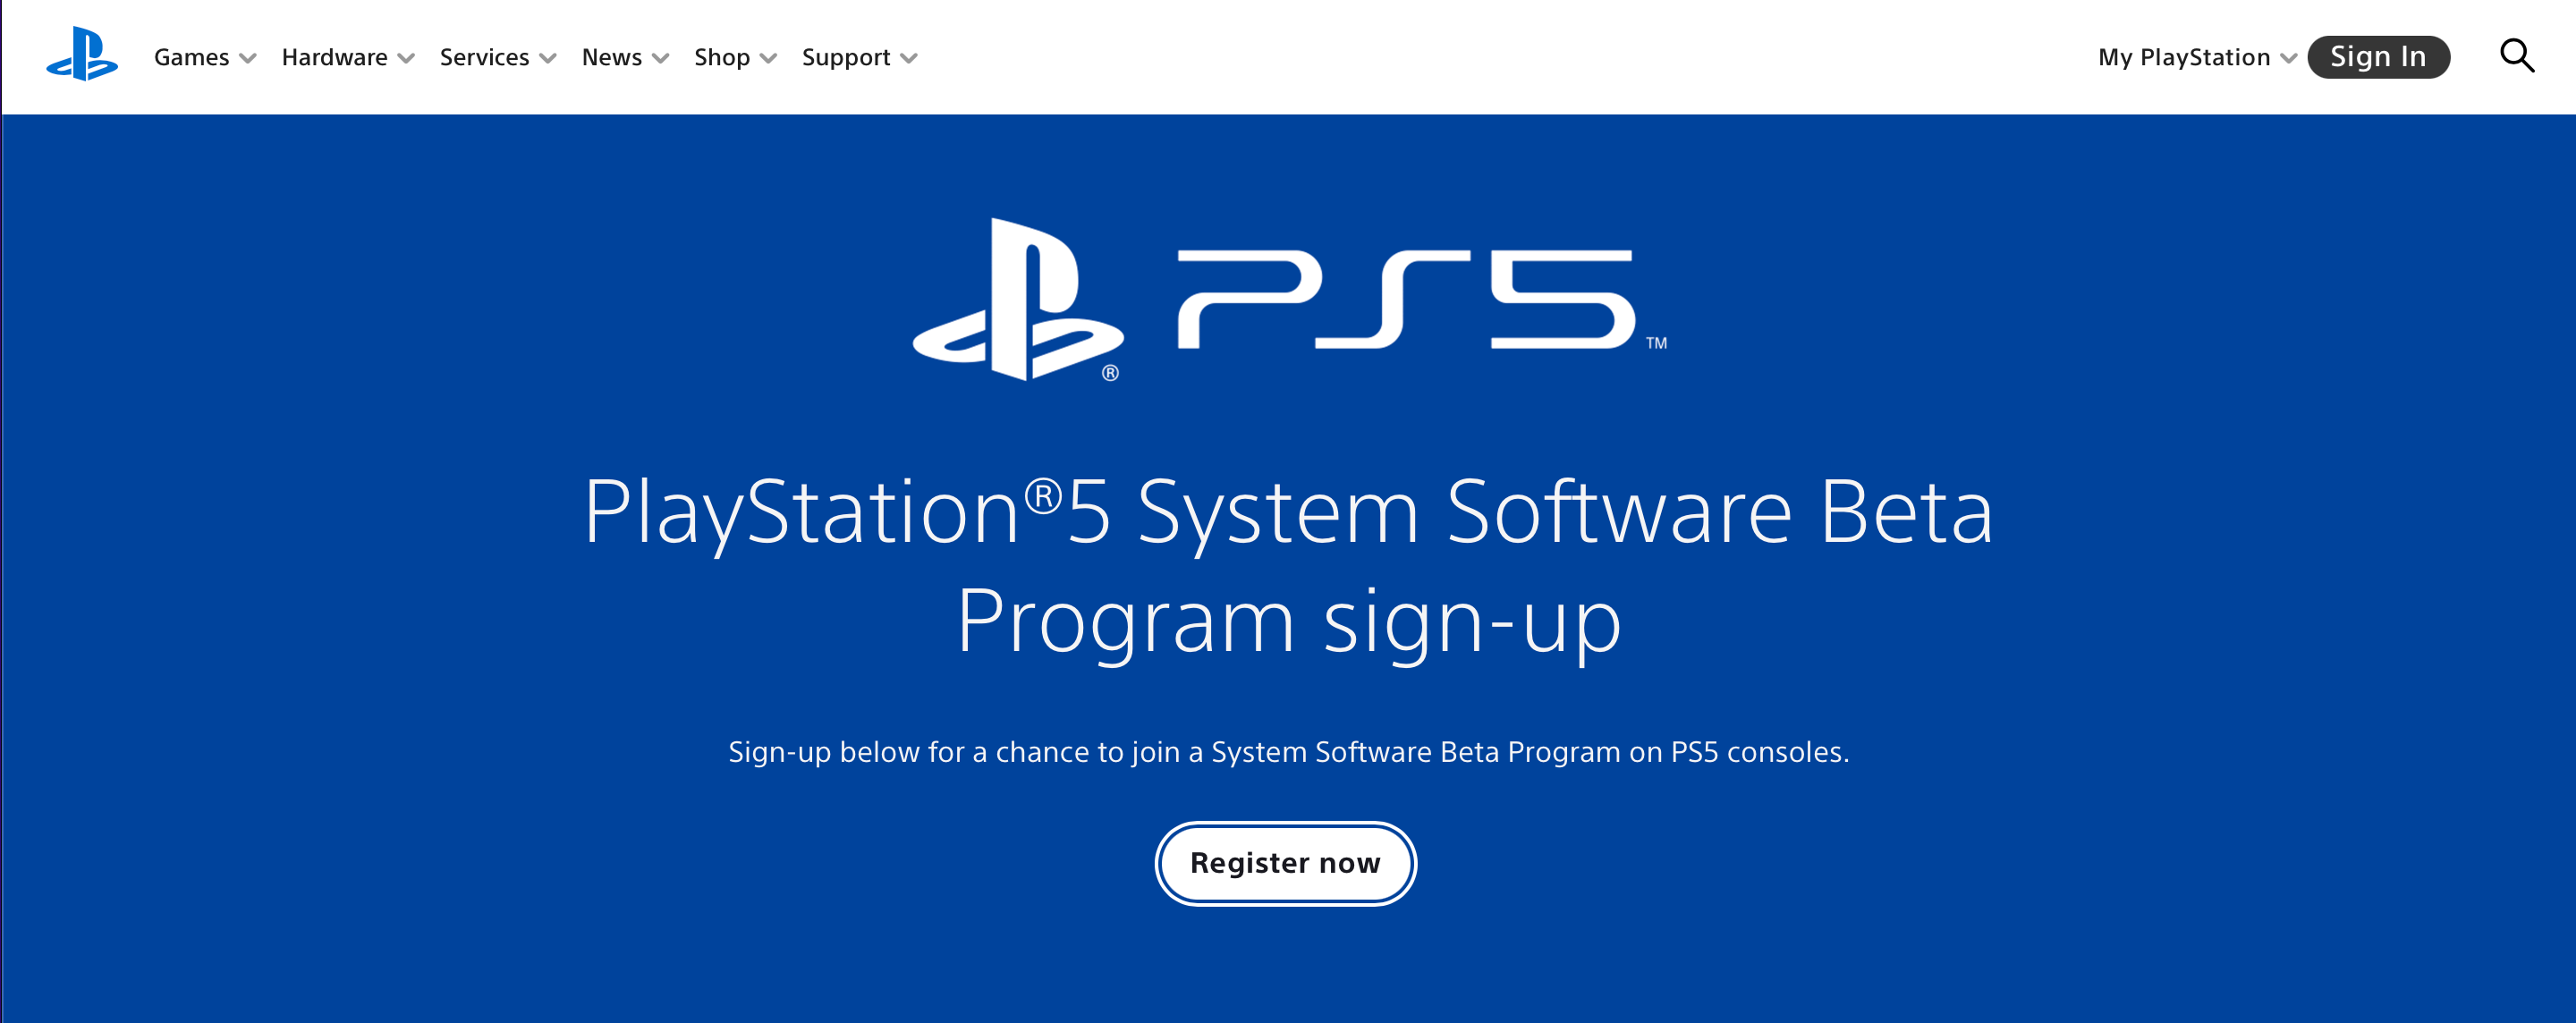 Screenshot of the sign-up page for the PS5 beta program.